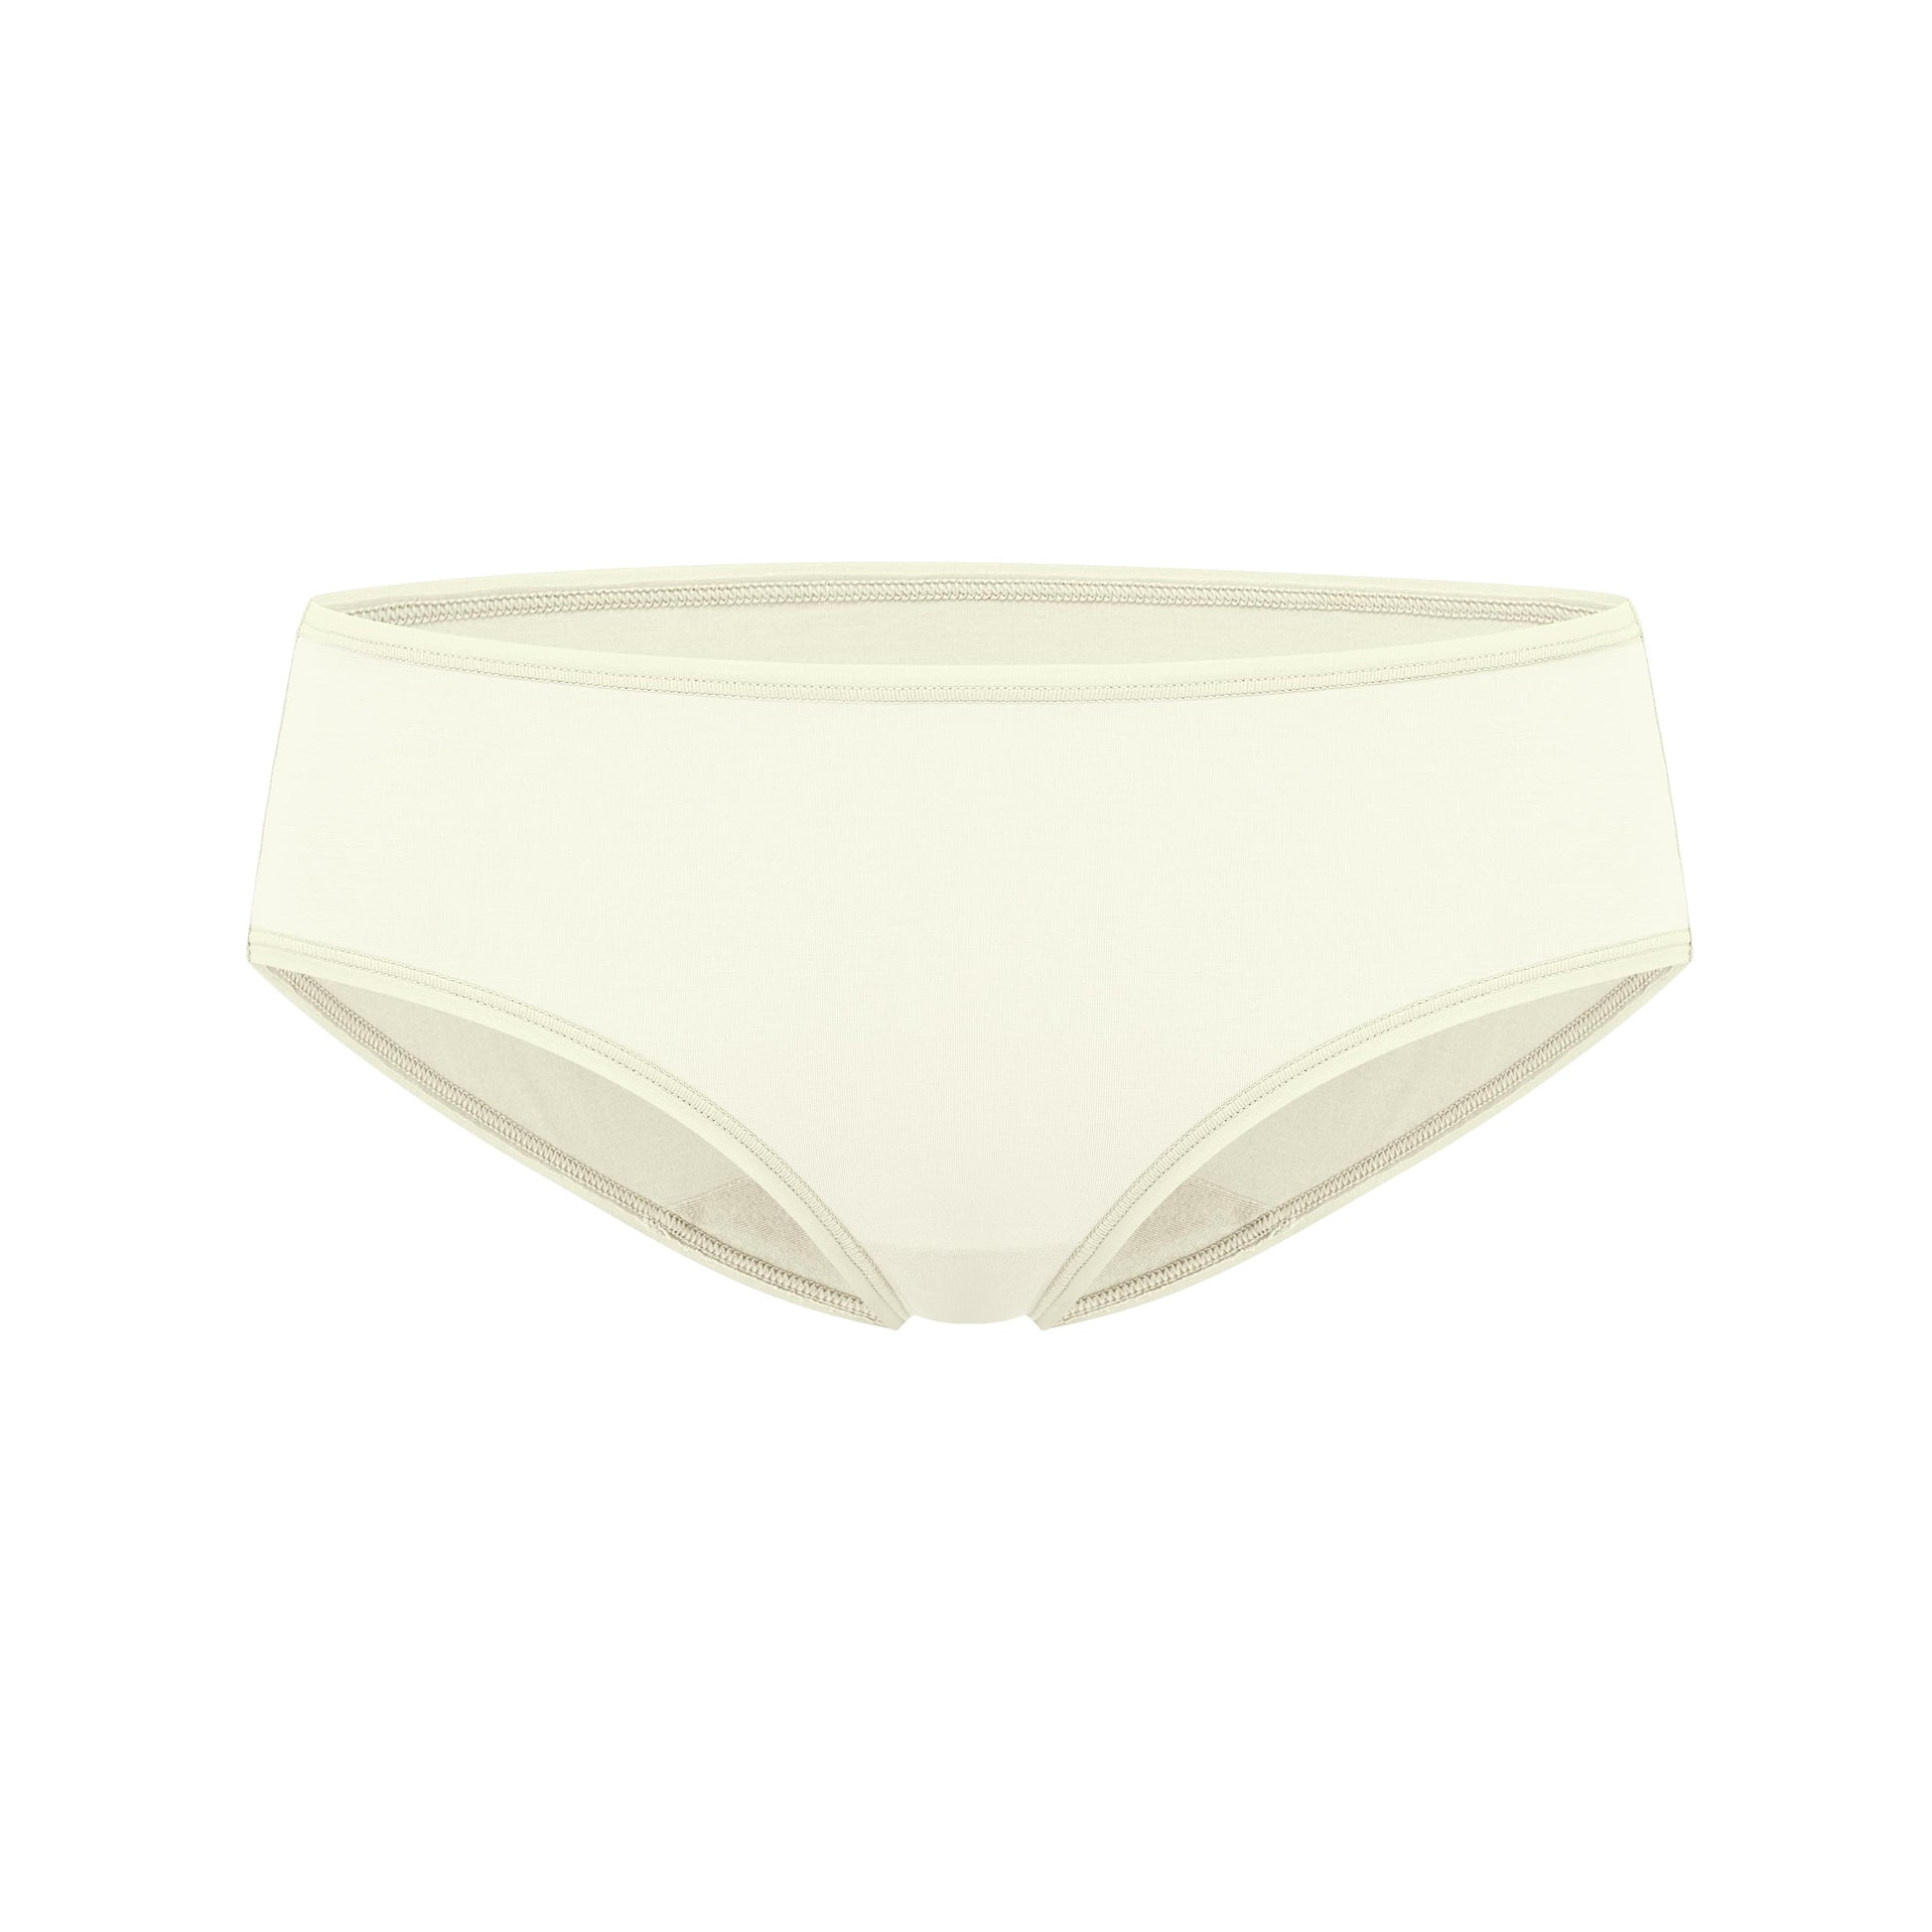 Women's White Underpants gifts - up to −79%